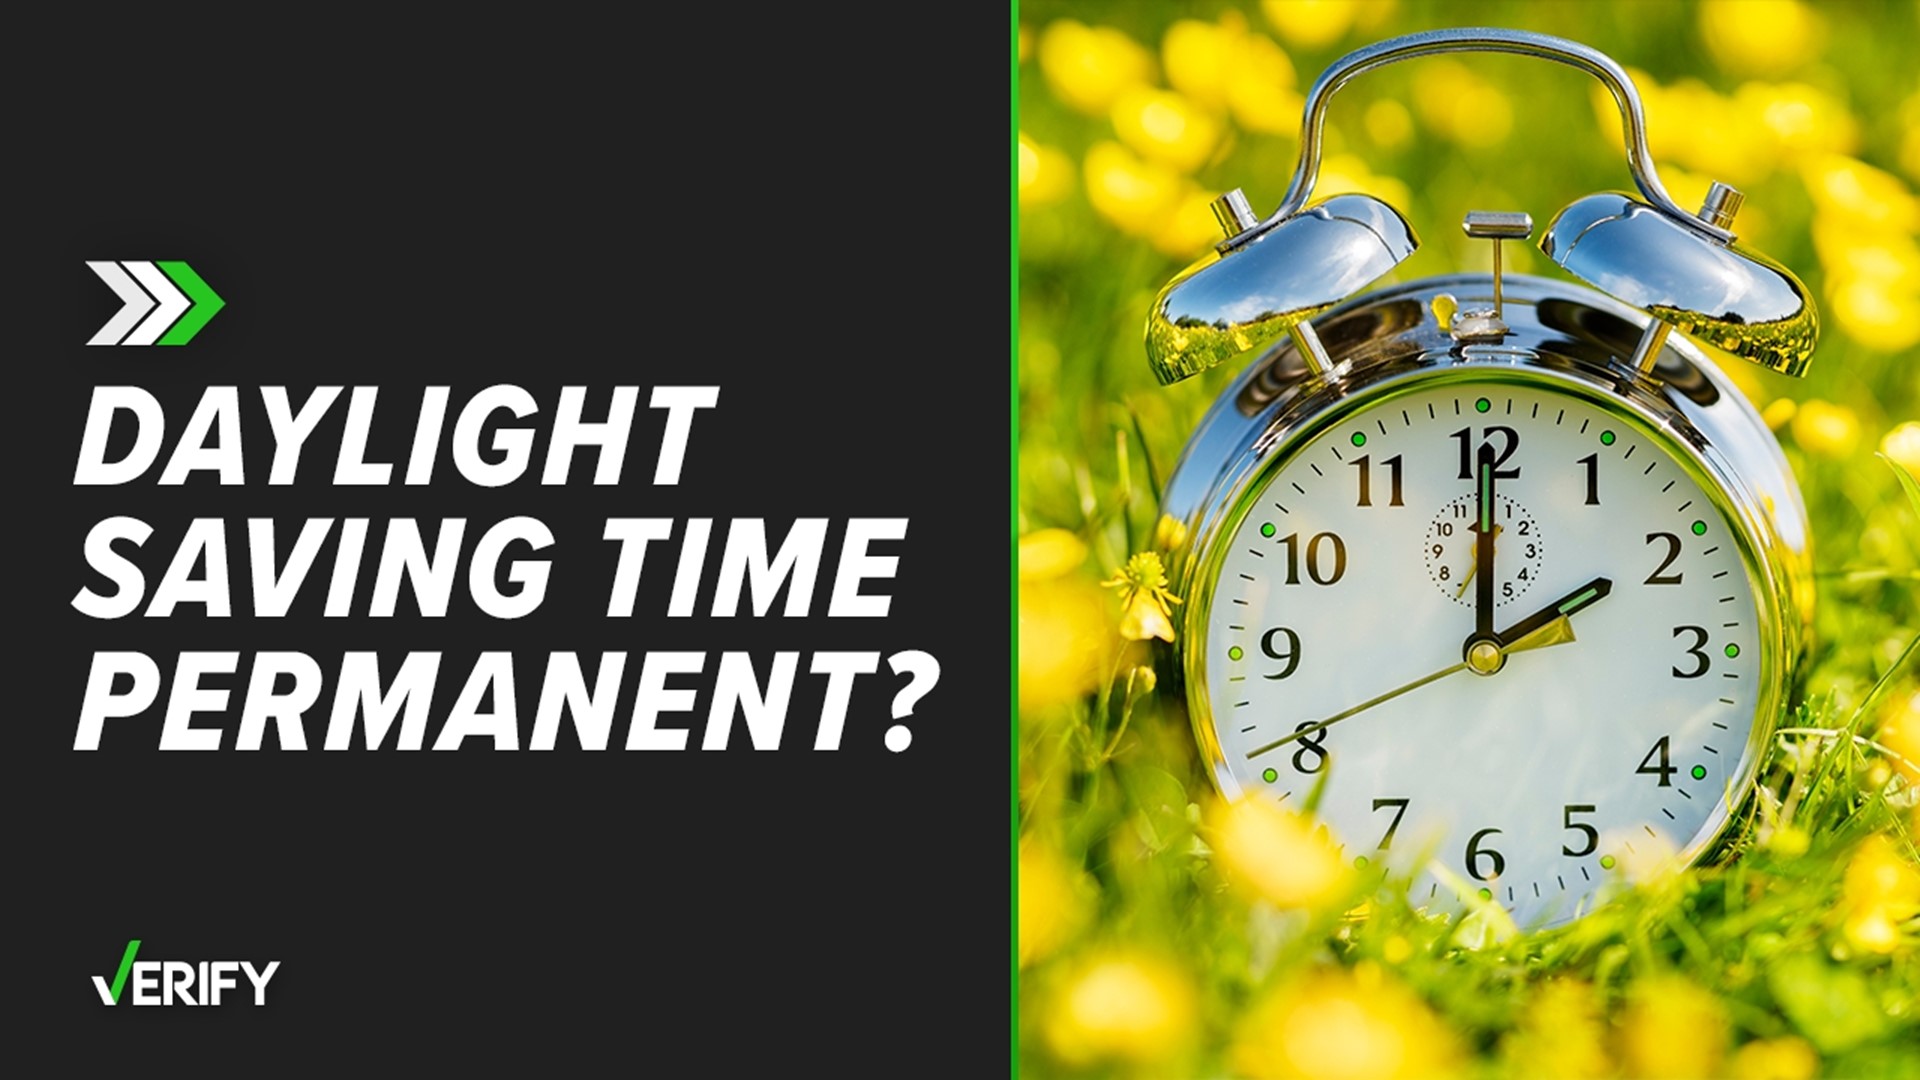 The Sunshine Protection Act would have made daylight saving time permanent beginning in 2023. But the bill hasn’t been voted on in the Senate.